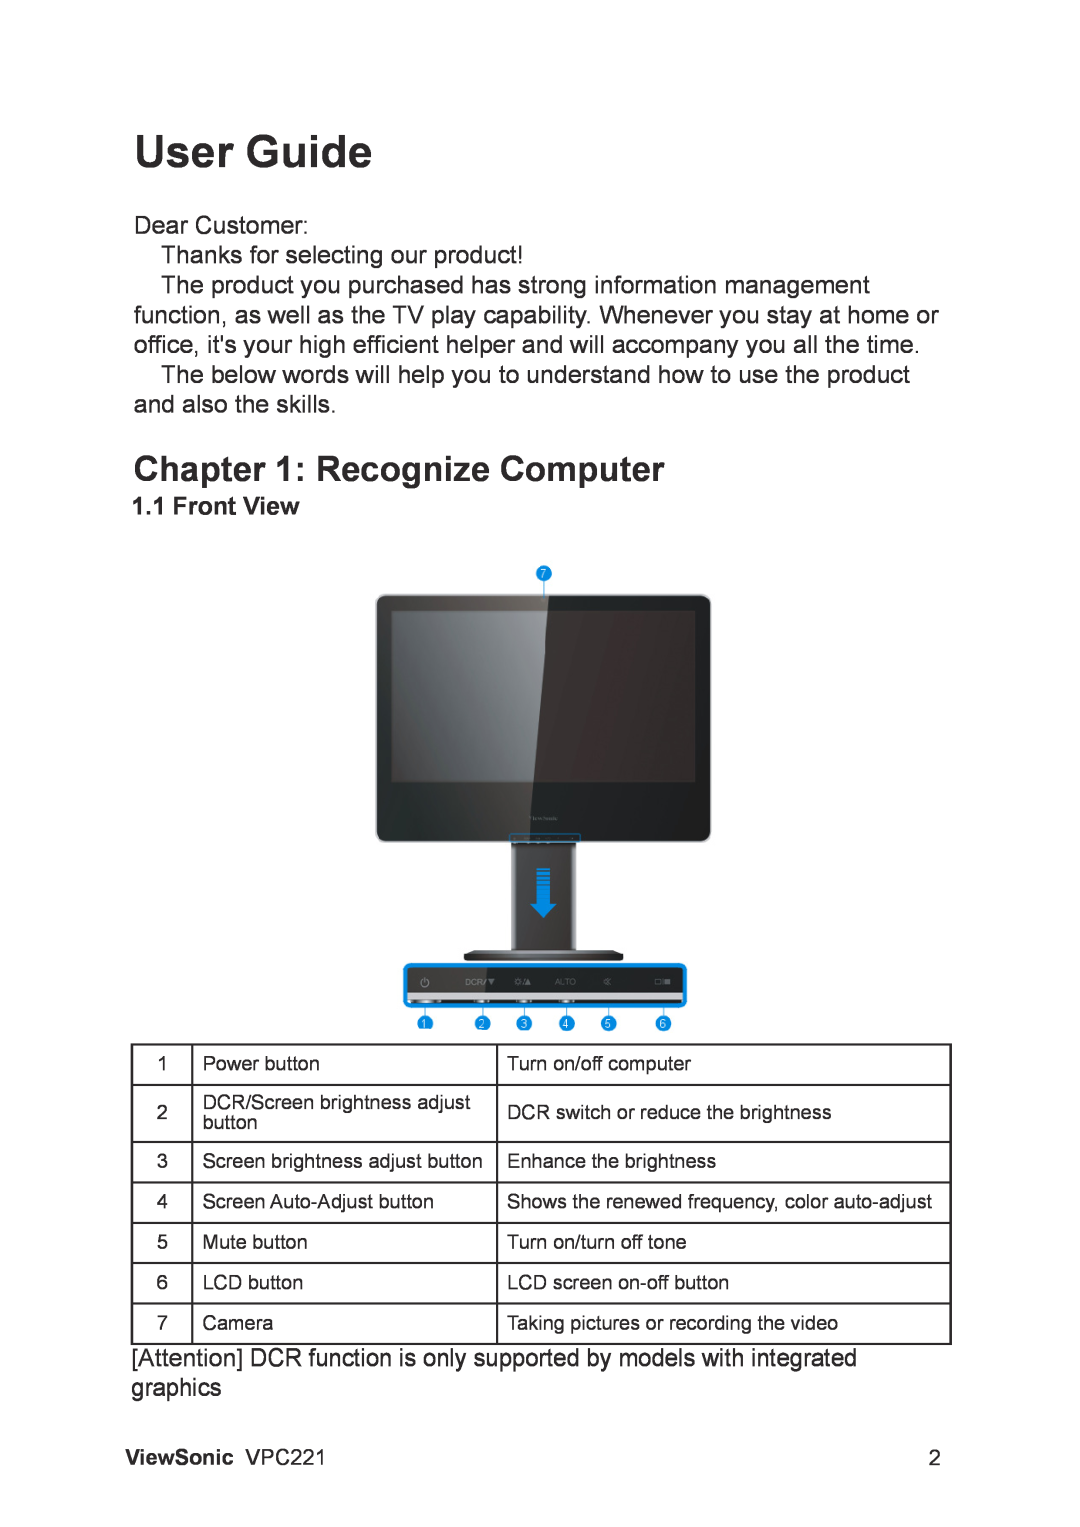 ViewSonic VS13730 manual Recognize Computer, User Guide, Front View 